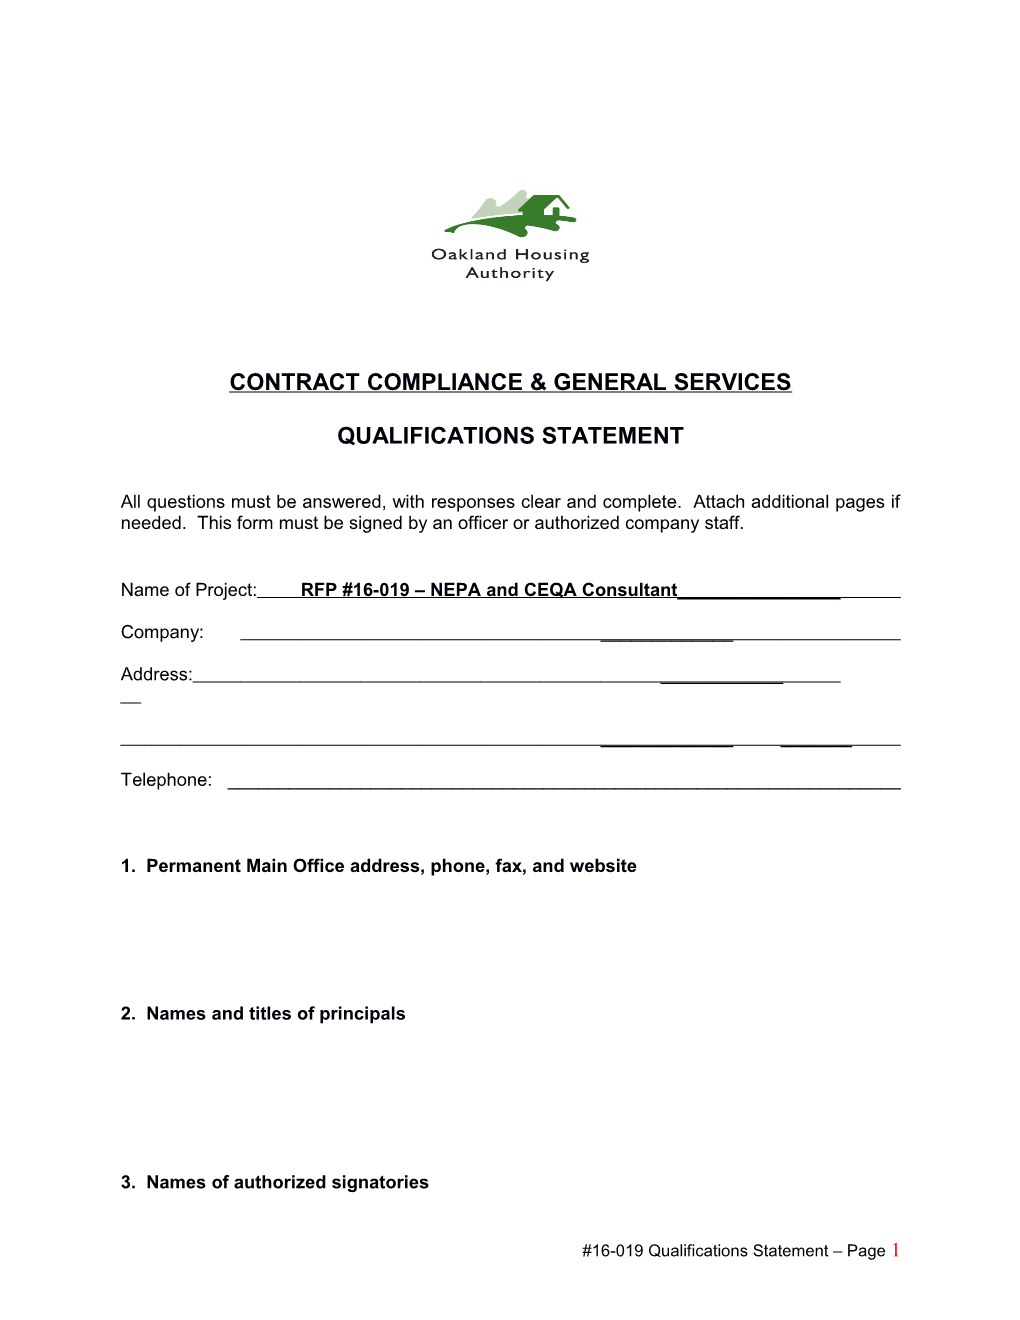 Contract Compliance & General Services